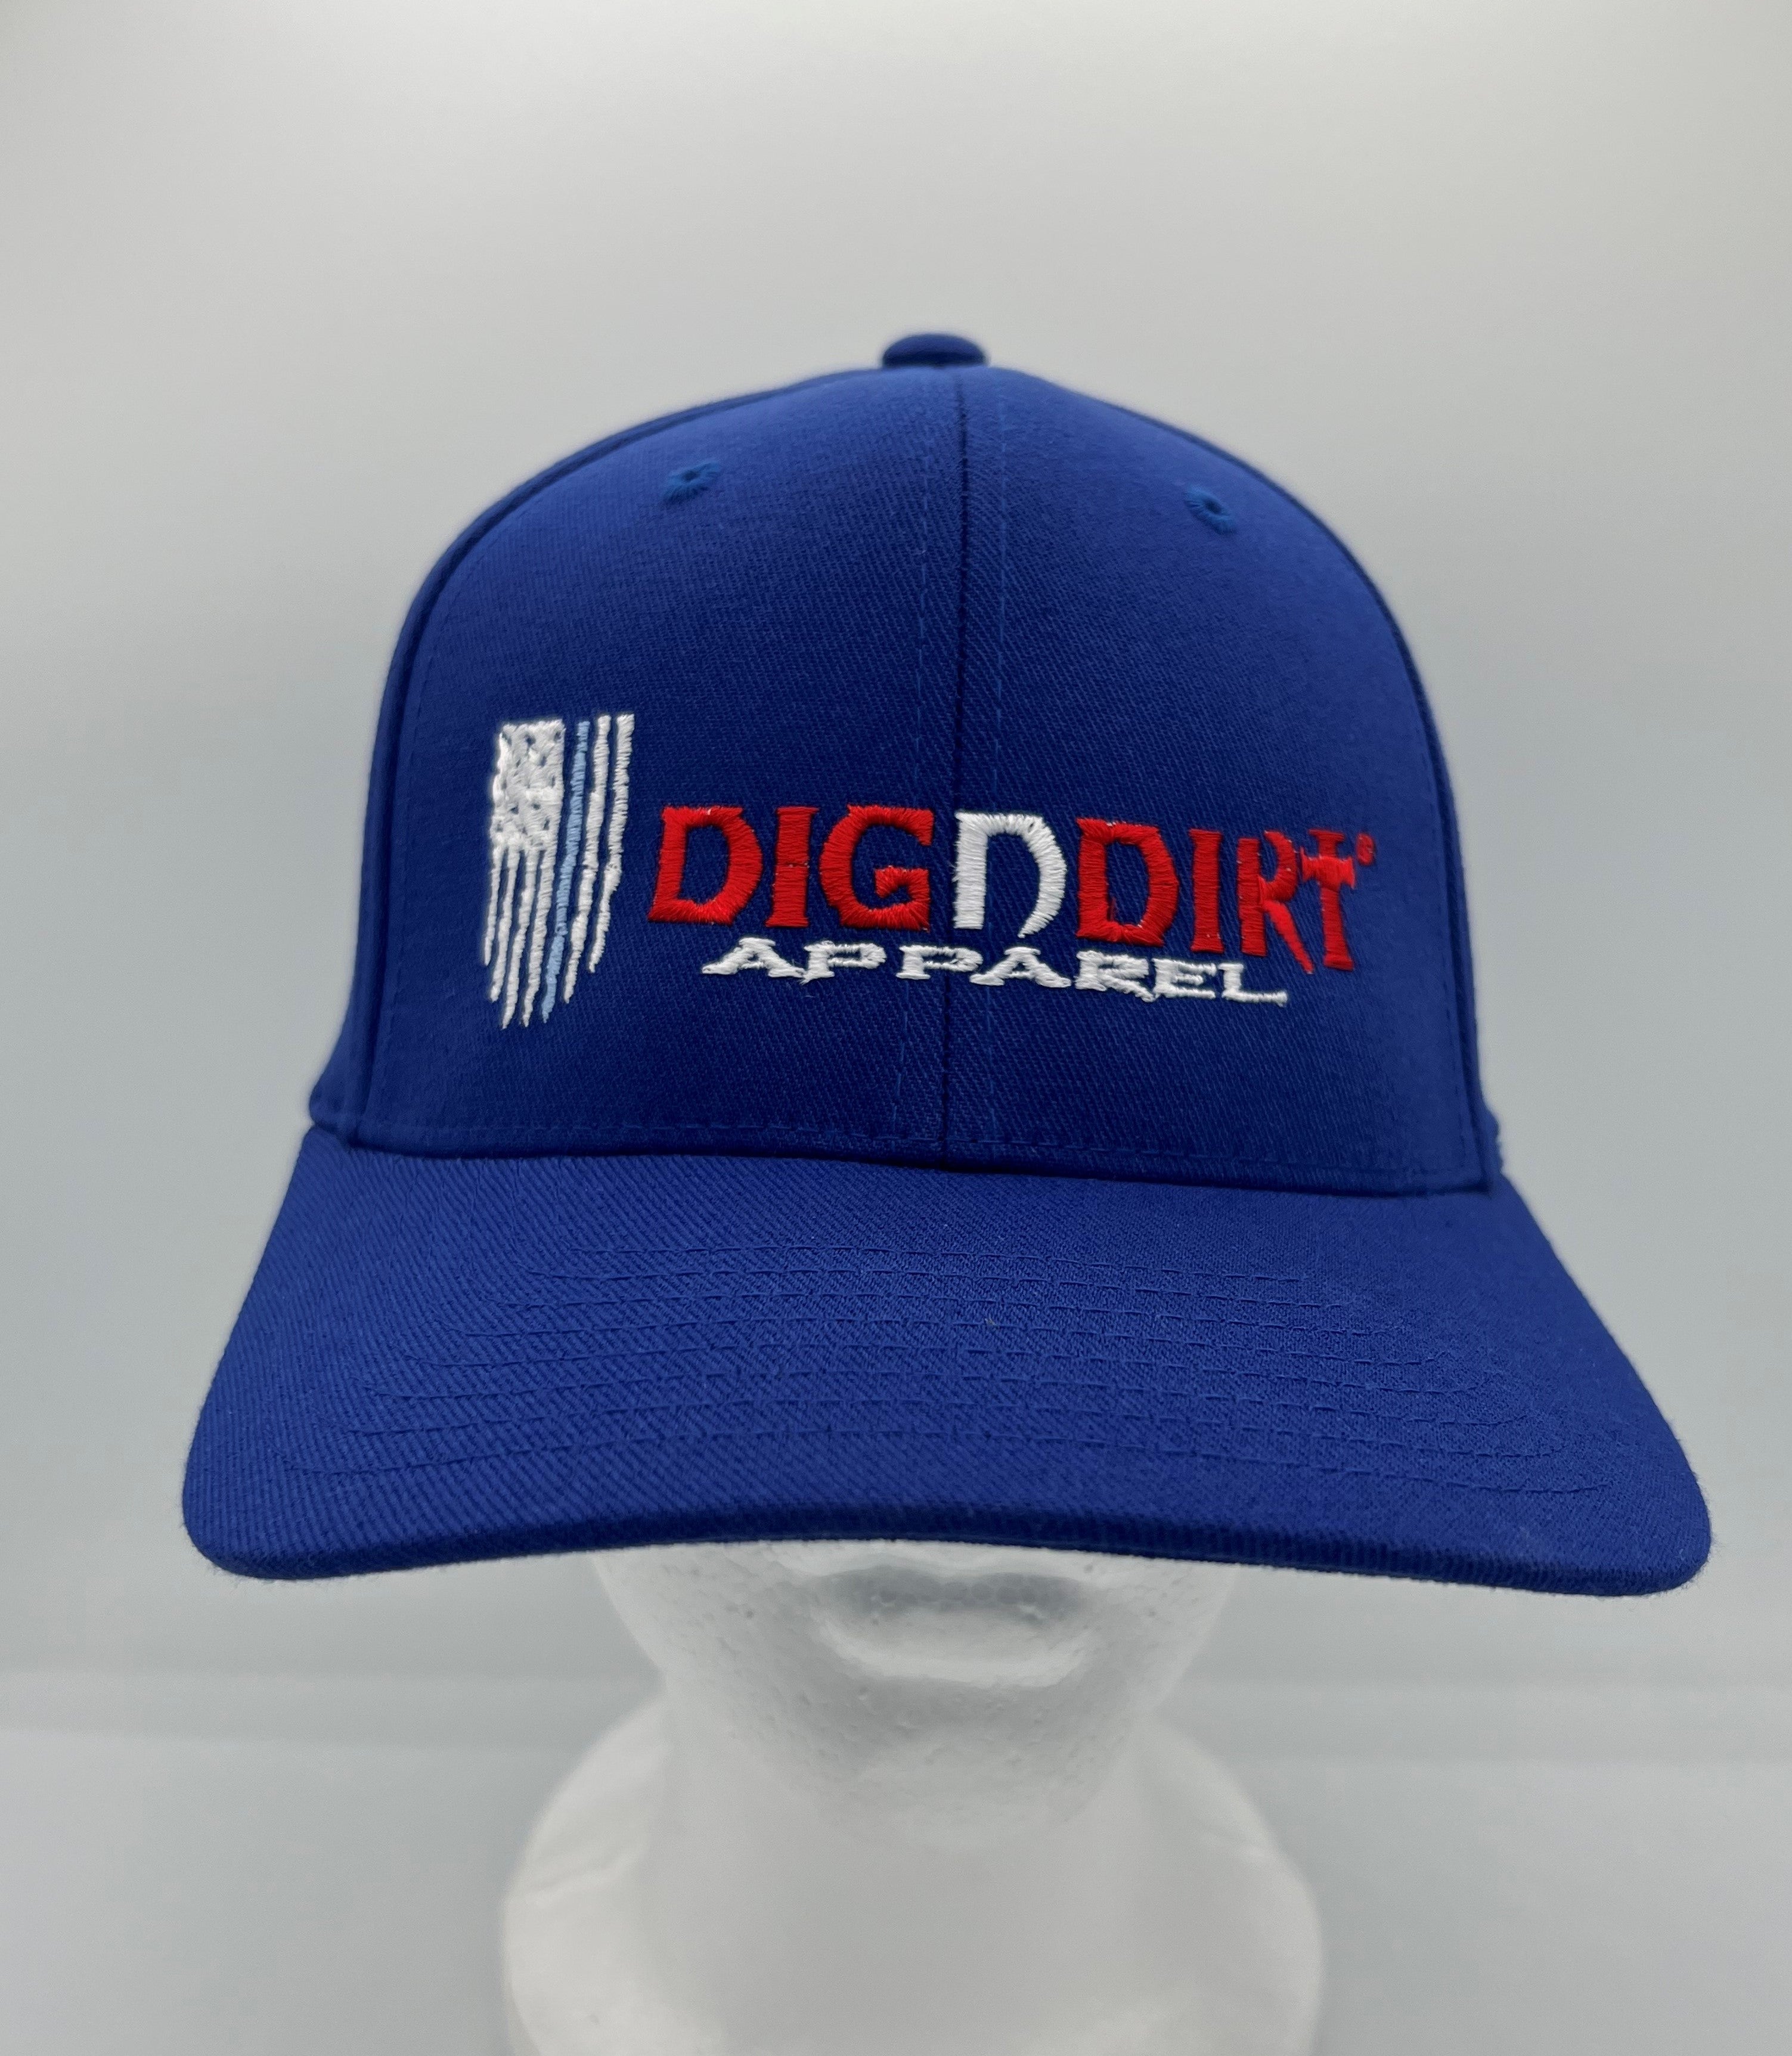 DIGNDIRT Apparel Red White and Blue FlexFit Hat